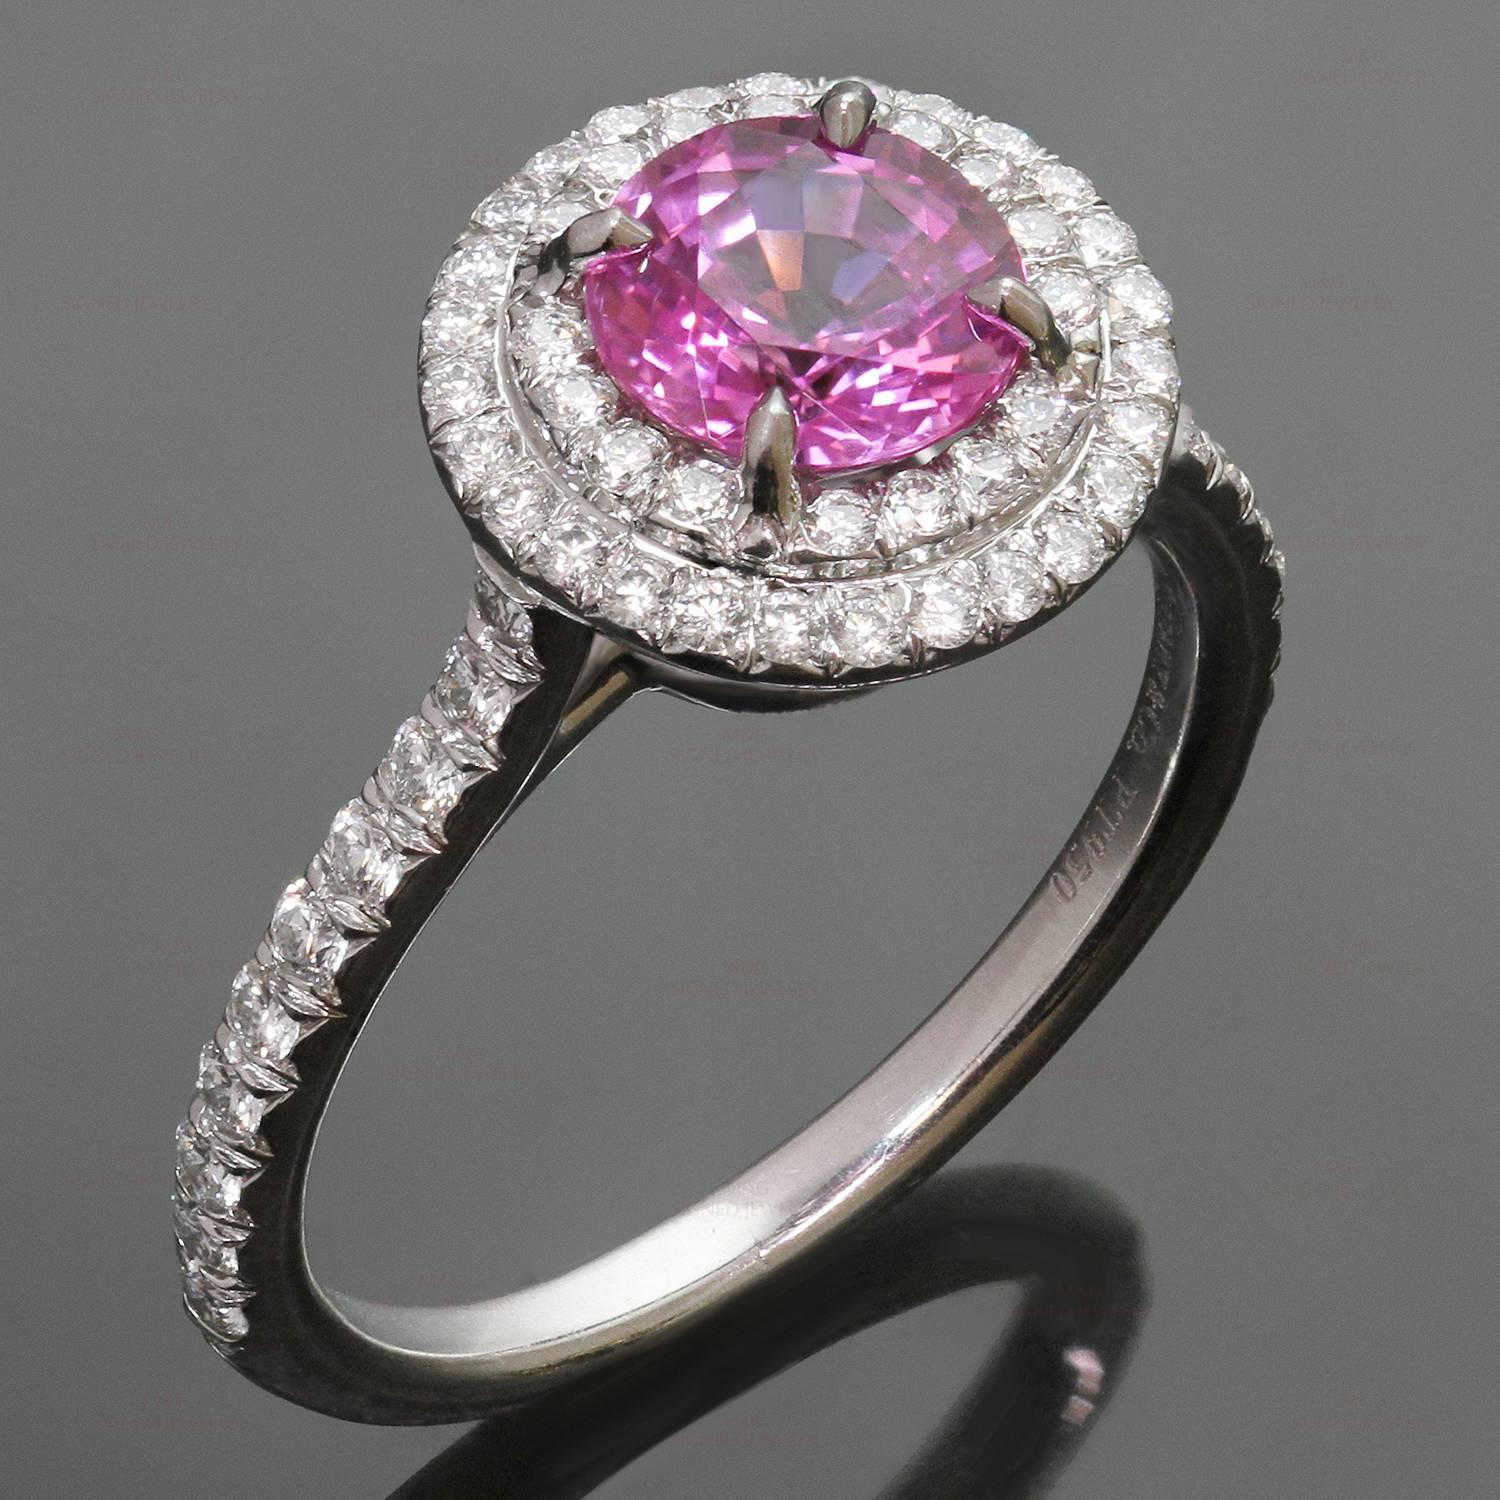 This stunning Tiffany & Co's Soleste collection is crafted in fine platinum and set with a faceted round pink sapphire of an estimated 1.25 carats and accented with brilliant-cut round diamonds of an estimated 0.36 carats. Made in United States